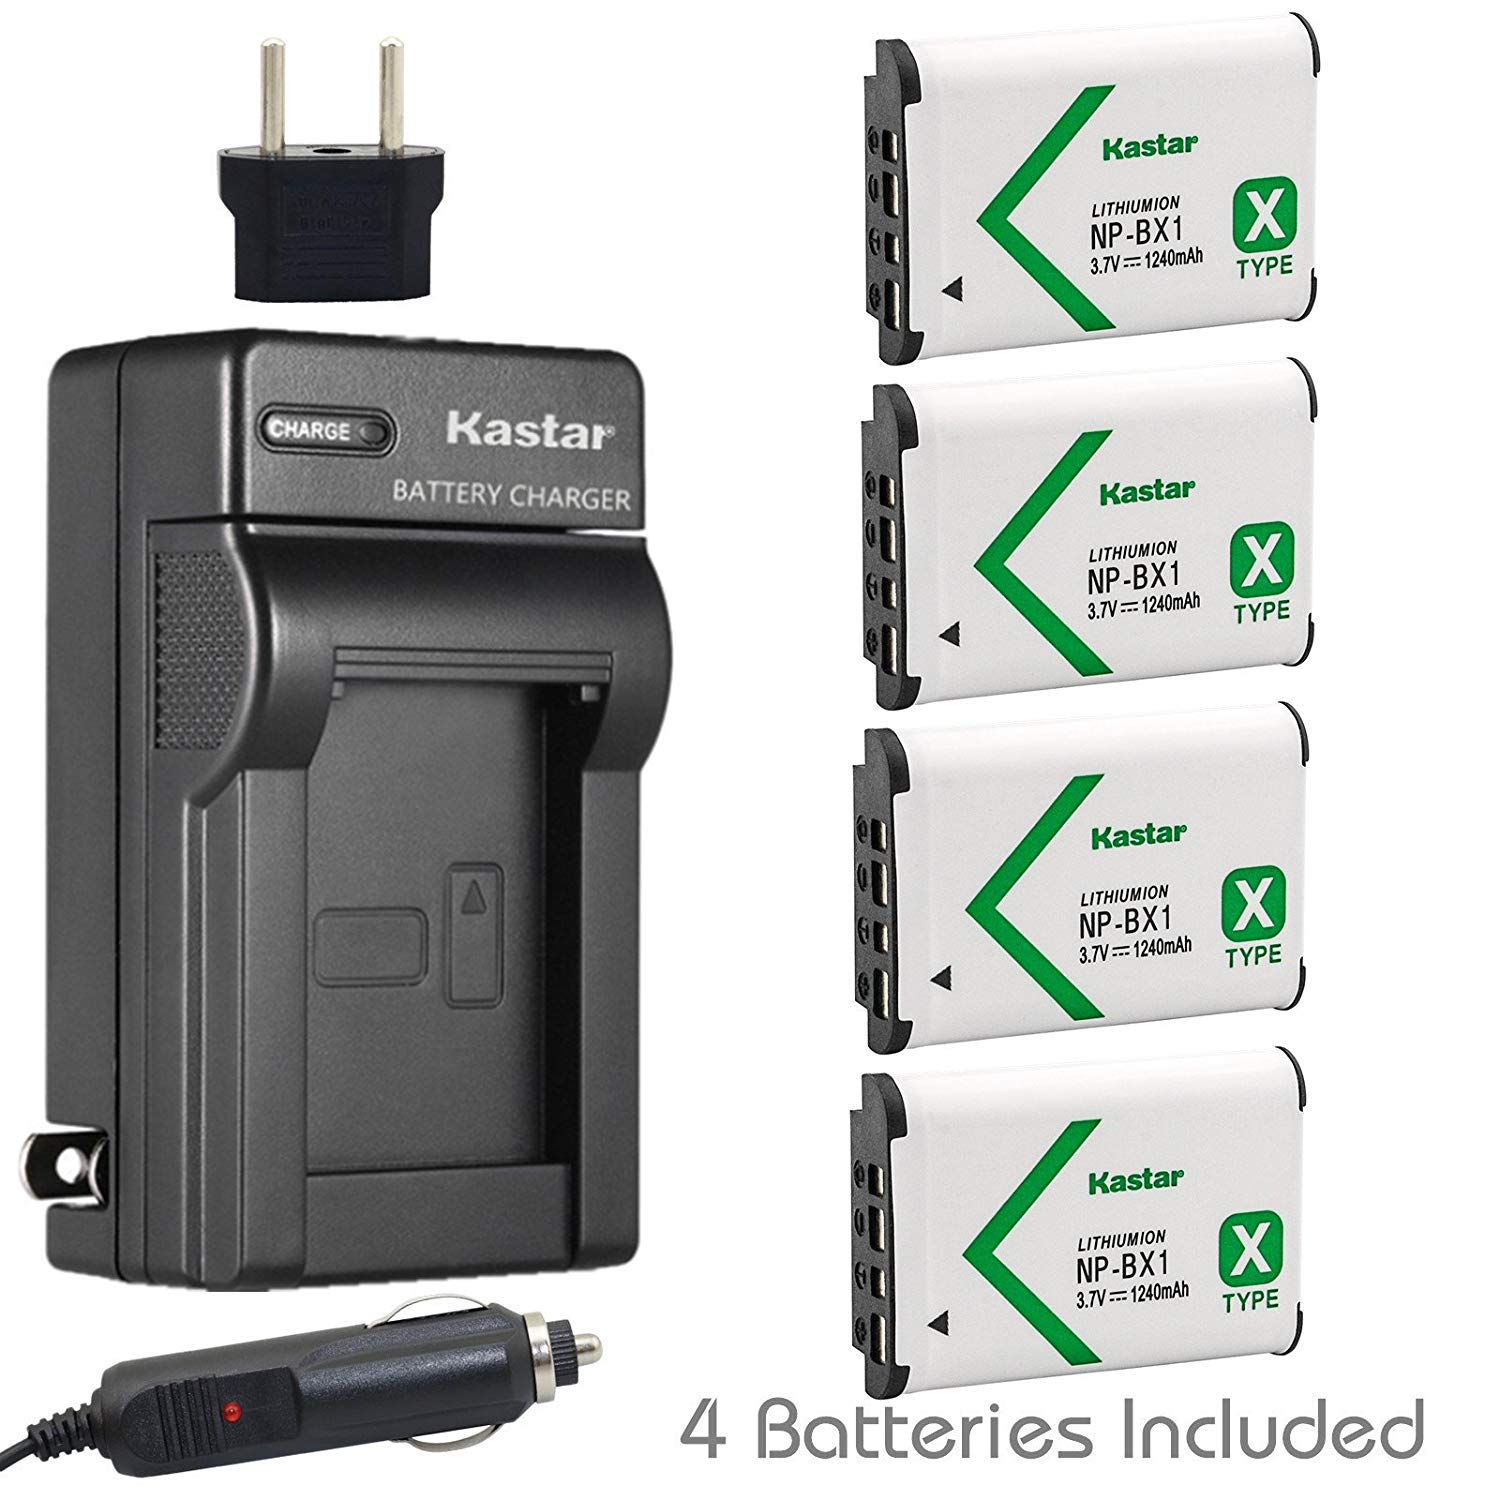 Kastar Battery (4-Pack) and Charger for Sony NP-BX1, M8 and Cyber-shot DSC-HX50V, HX300, RX1, RX1R, RX100, RX100M, RX100M3, WX300, HDR-AS10, AS15, AS30V, AS100V, AS100VR, CX240, MV1, PJ275 Camera